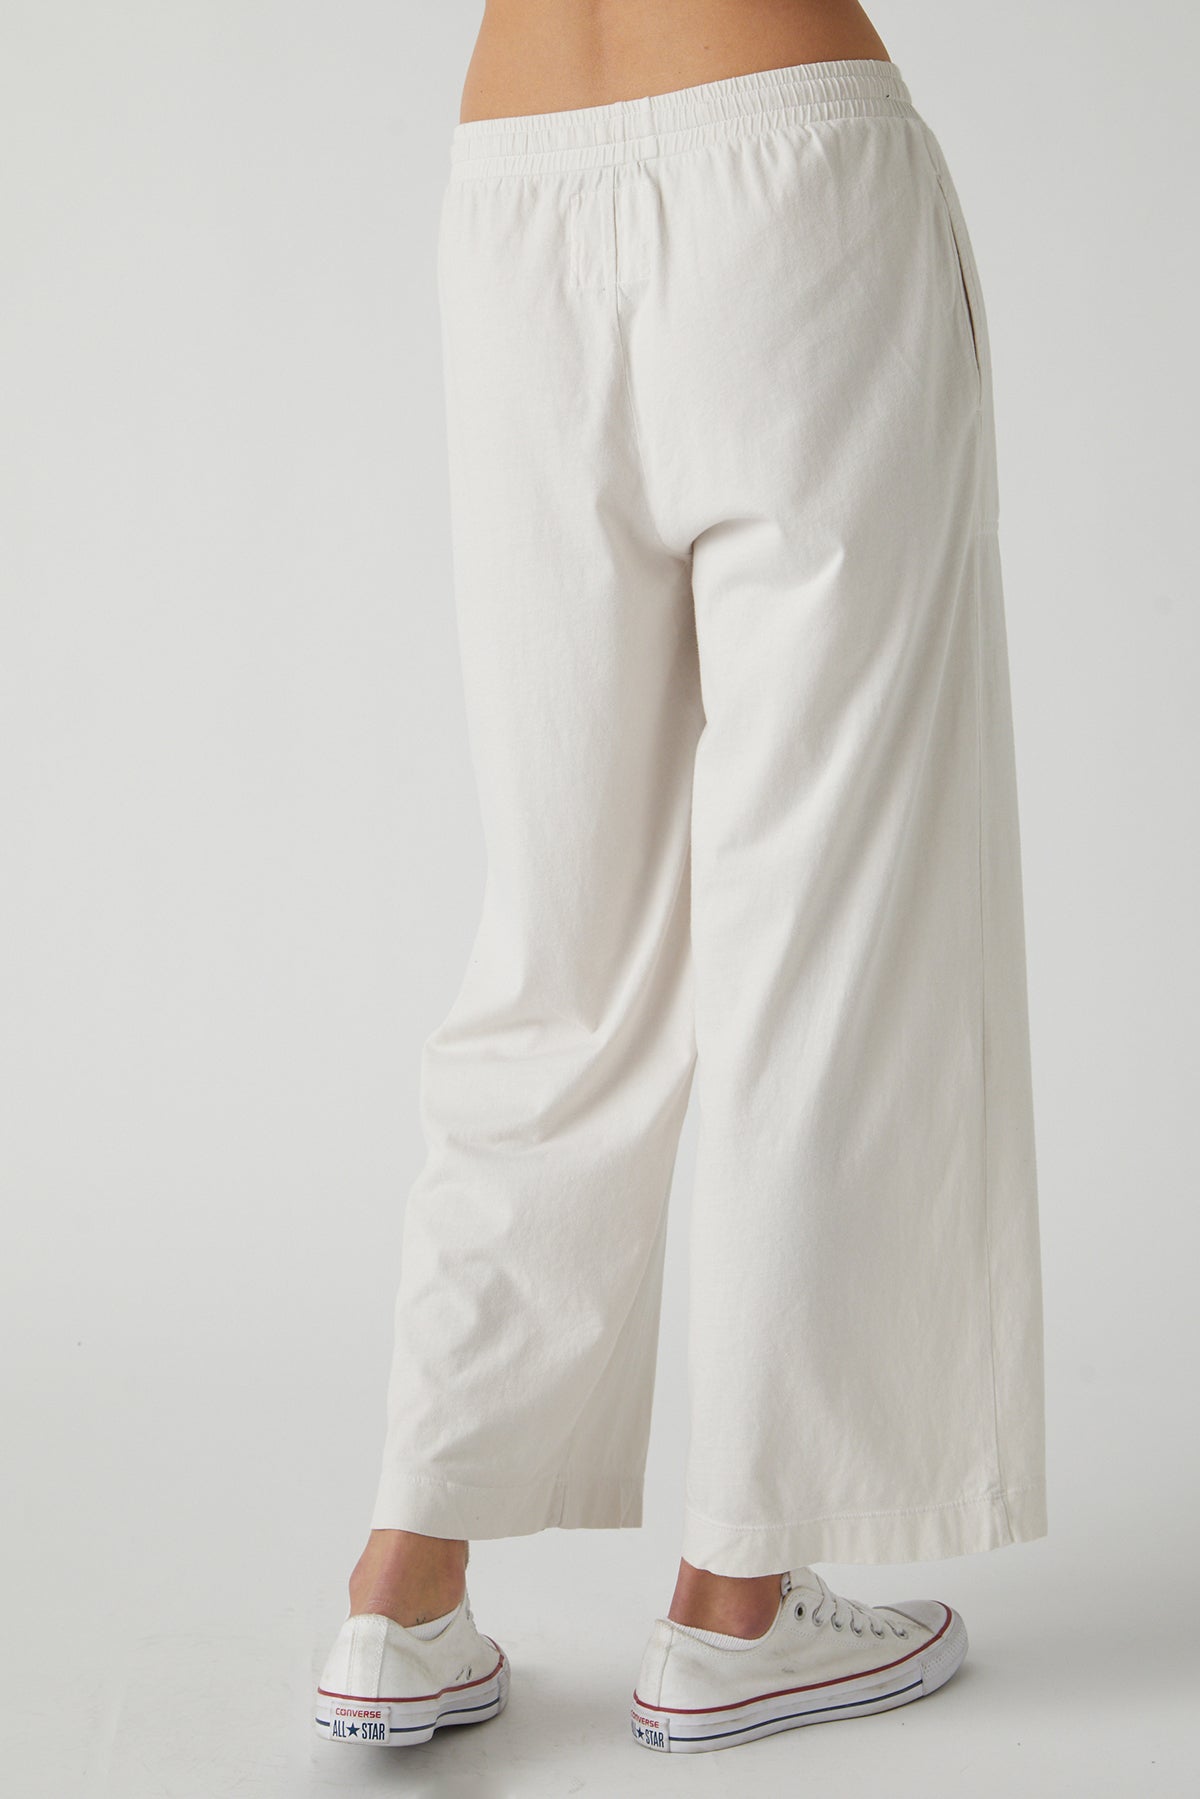 Pismo Pant in beach back-25156538630337